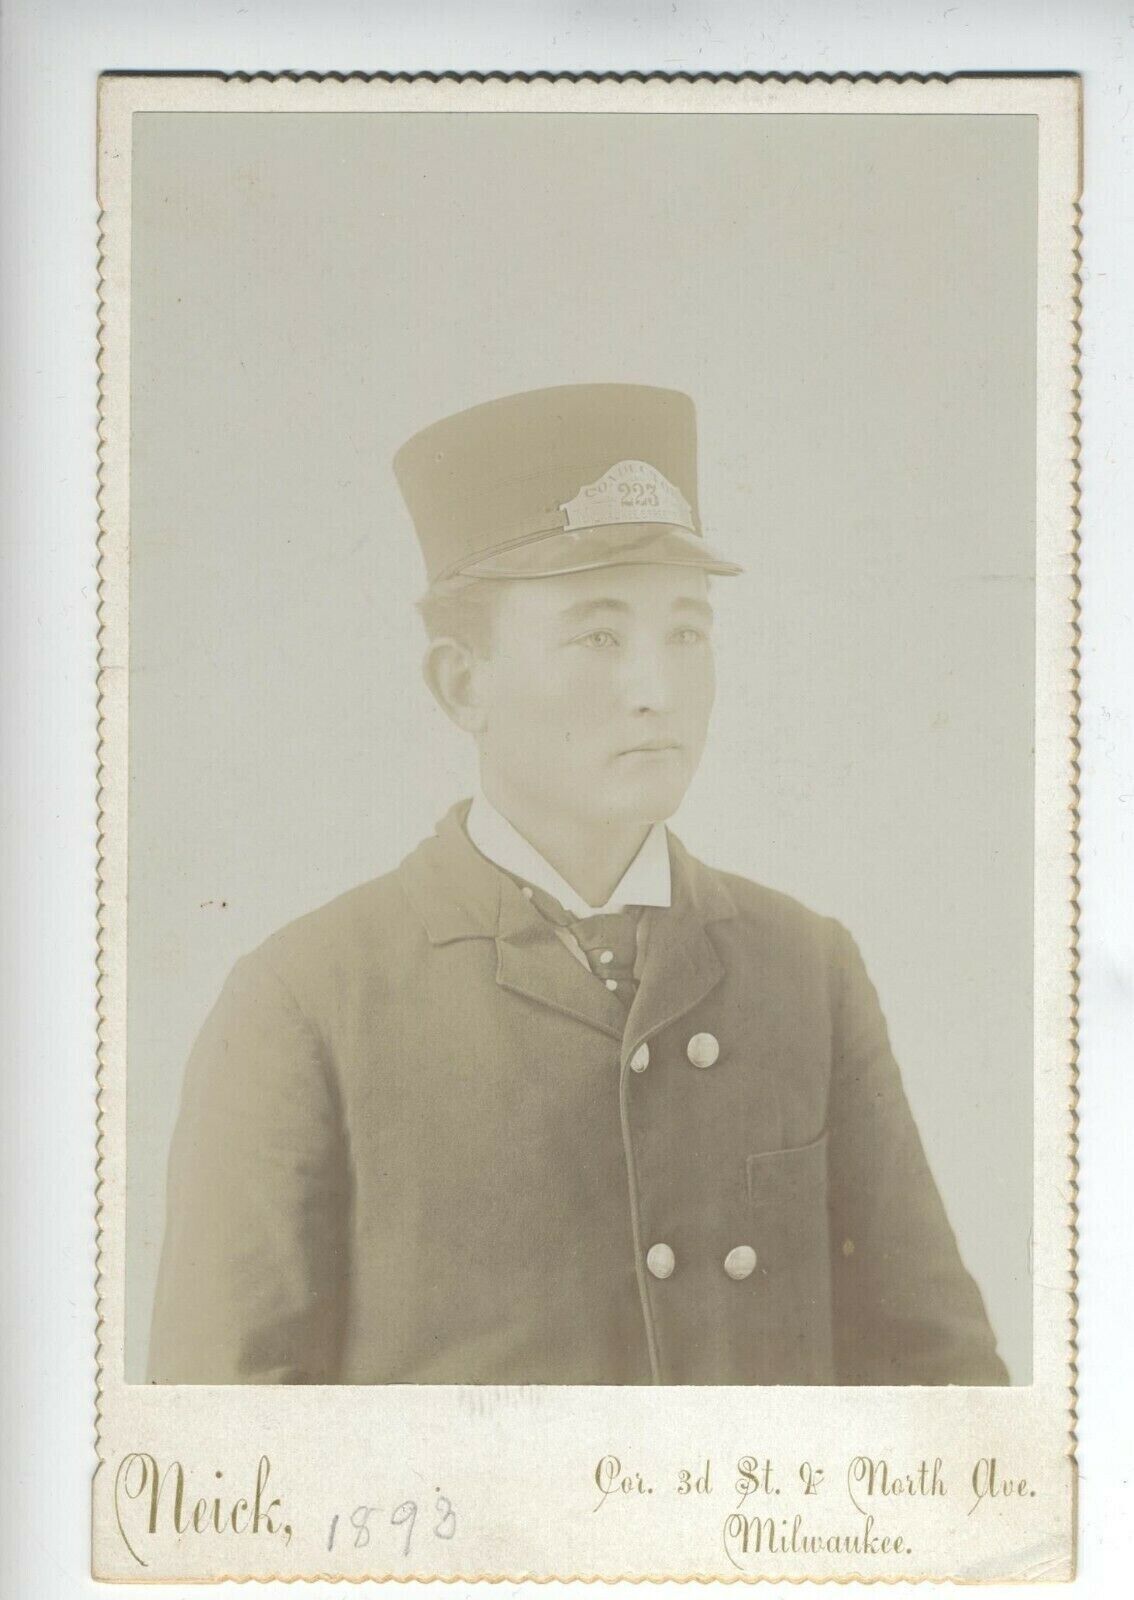 CHINESE RAILROAD CONDUCTOR CABINET CARD MILWAUKEE WISCONSIN 1893 ORIGINAL